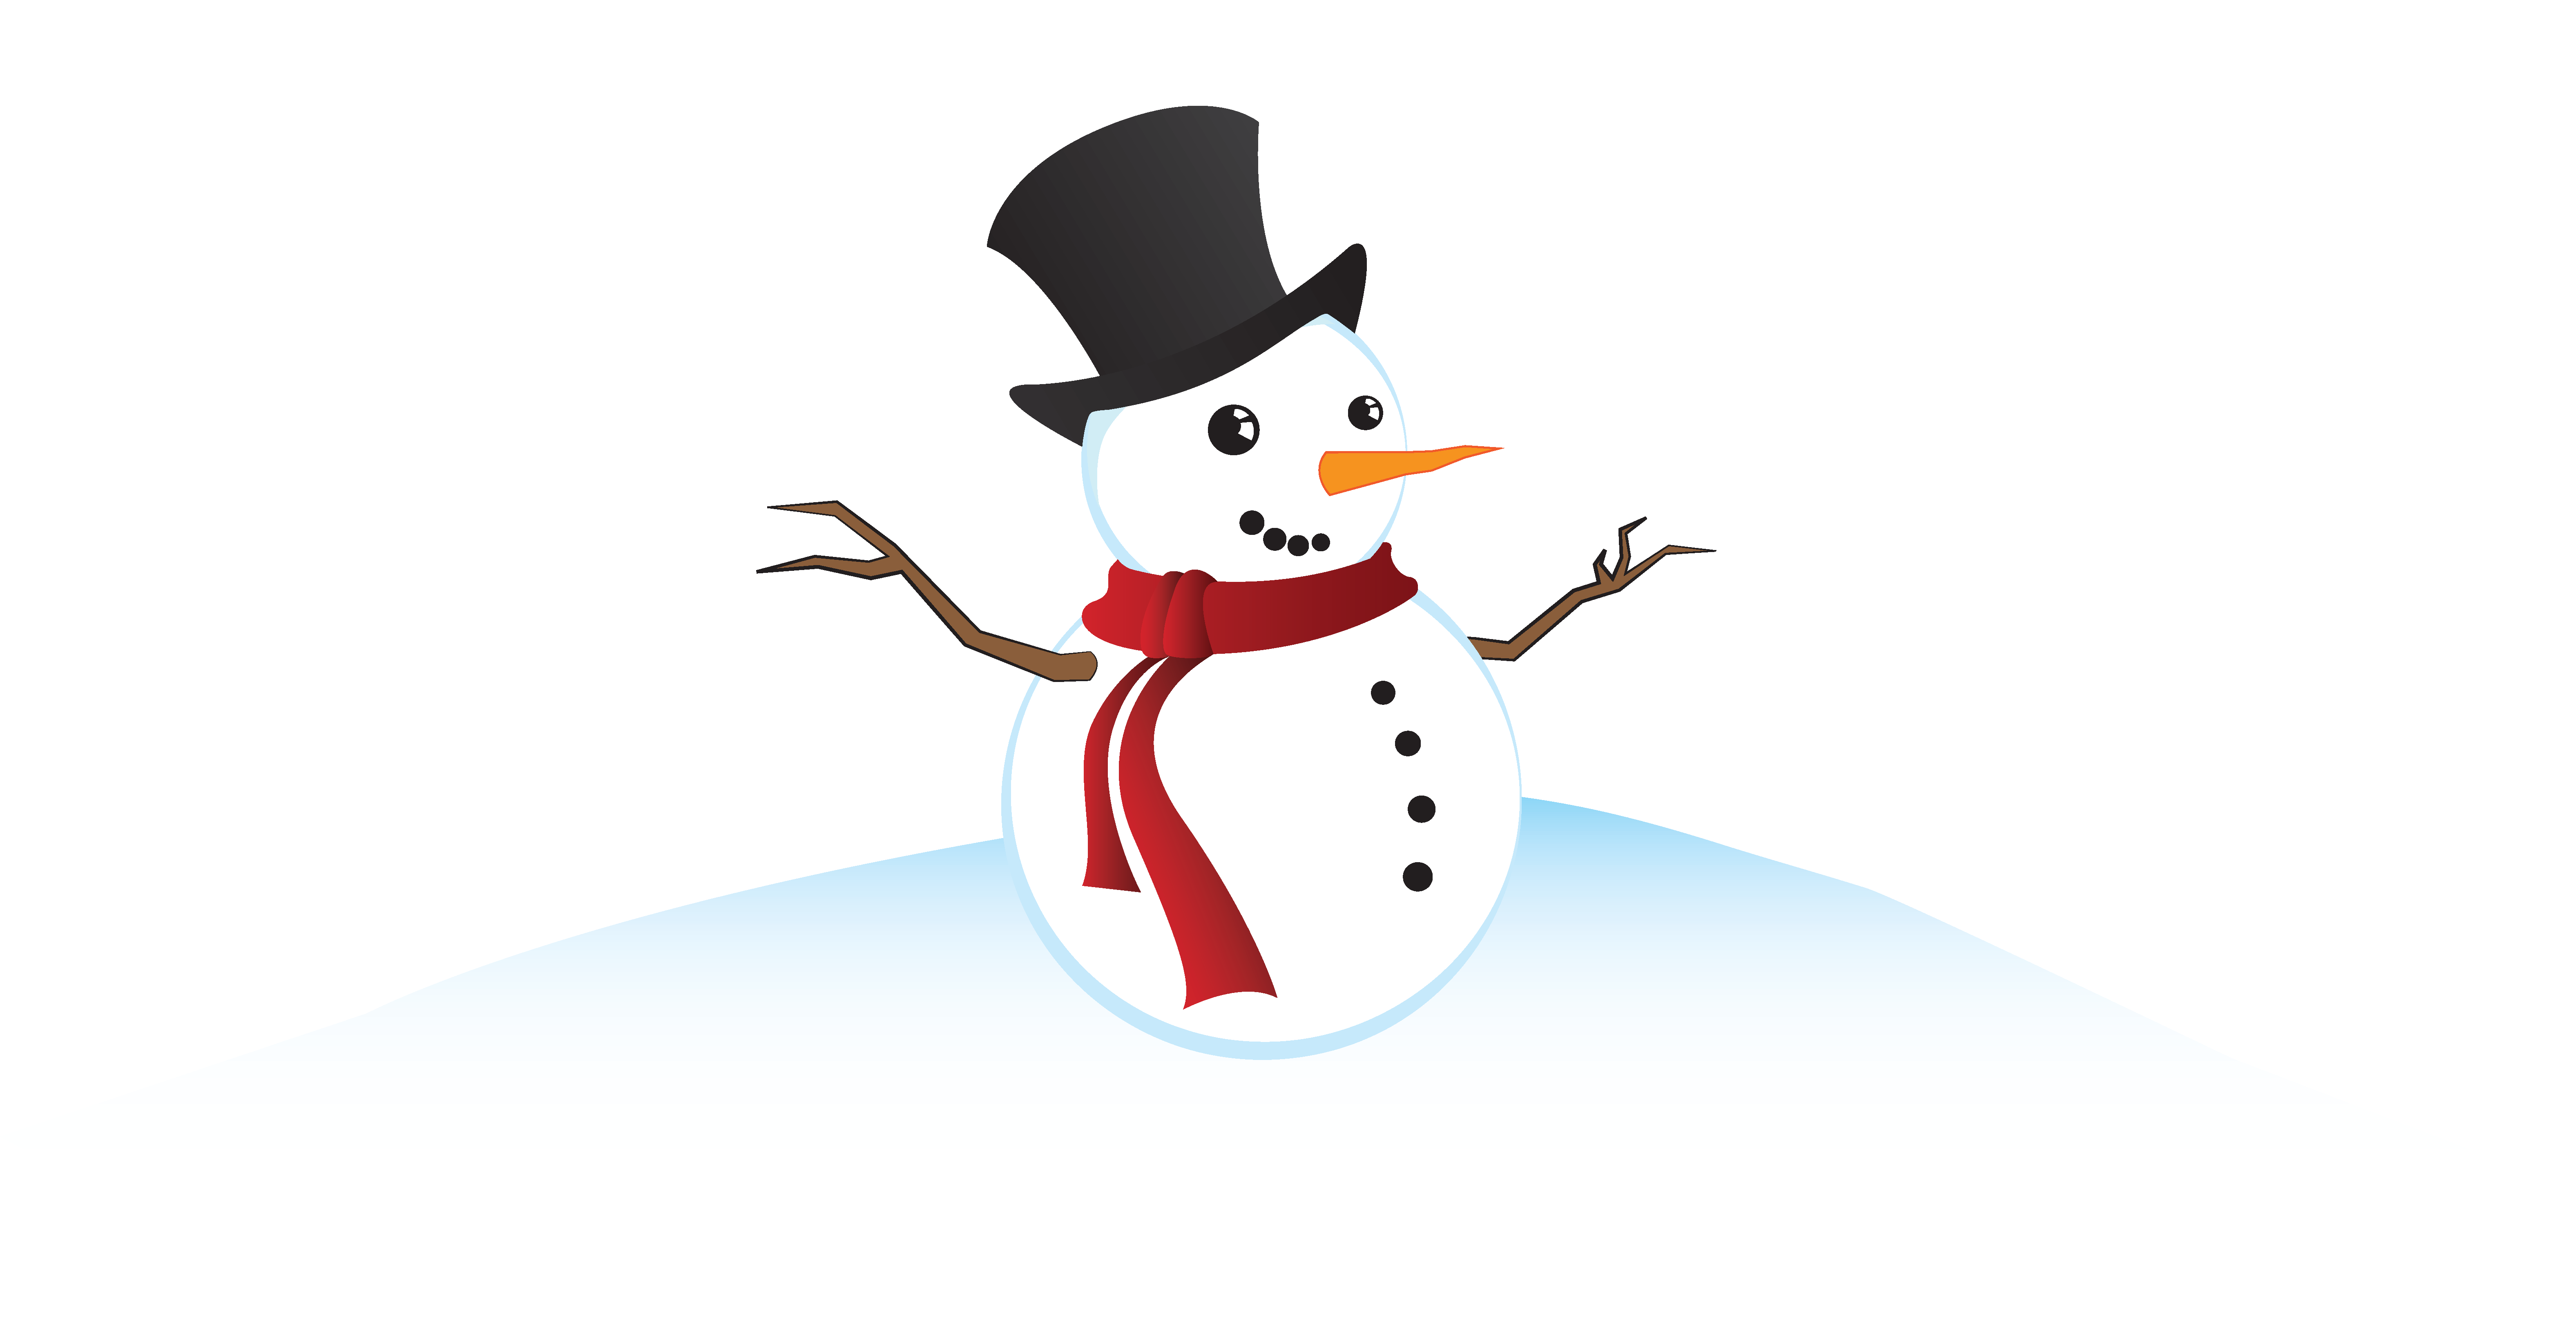 The great snowman building. Magazine clipart rolled up